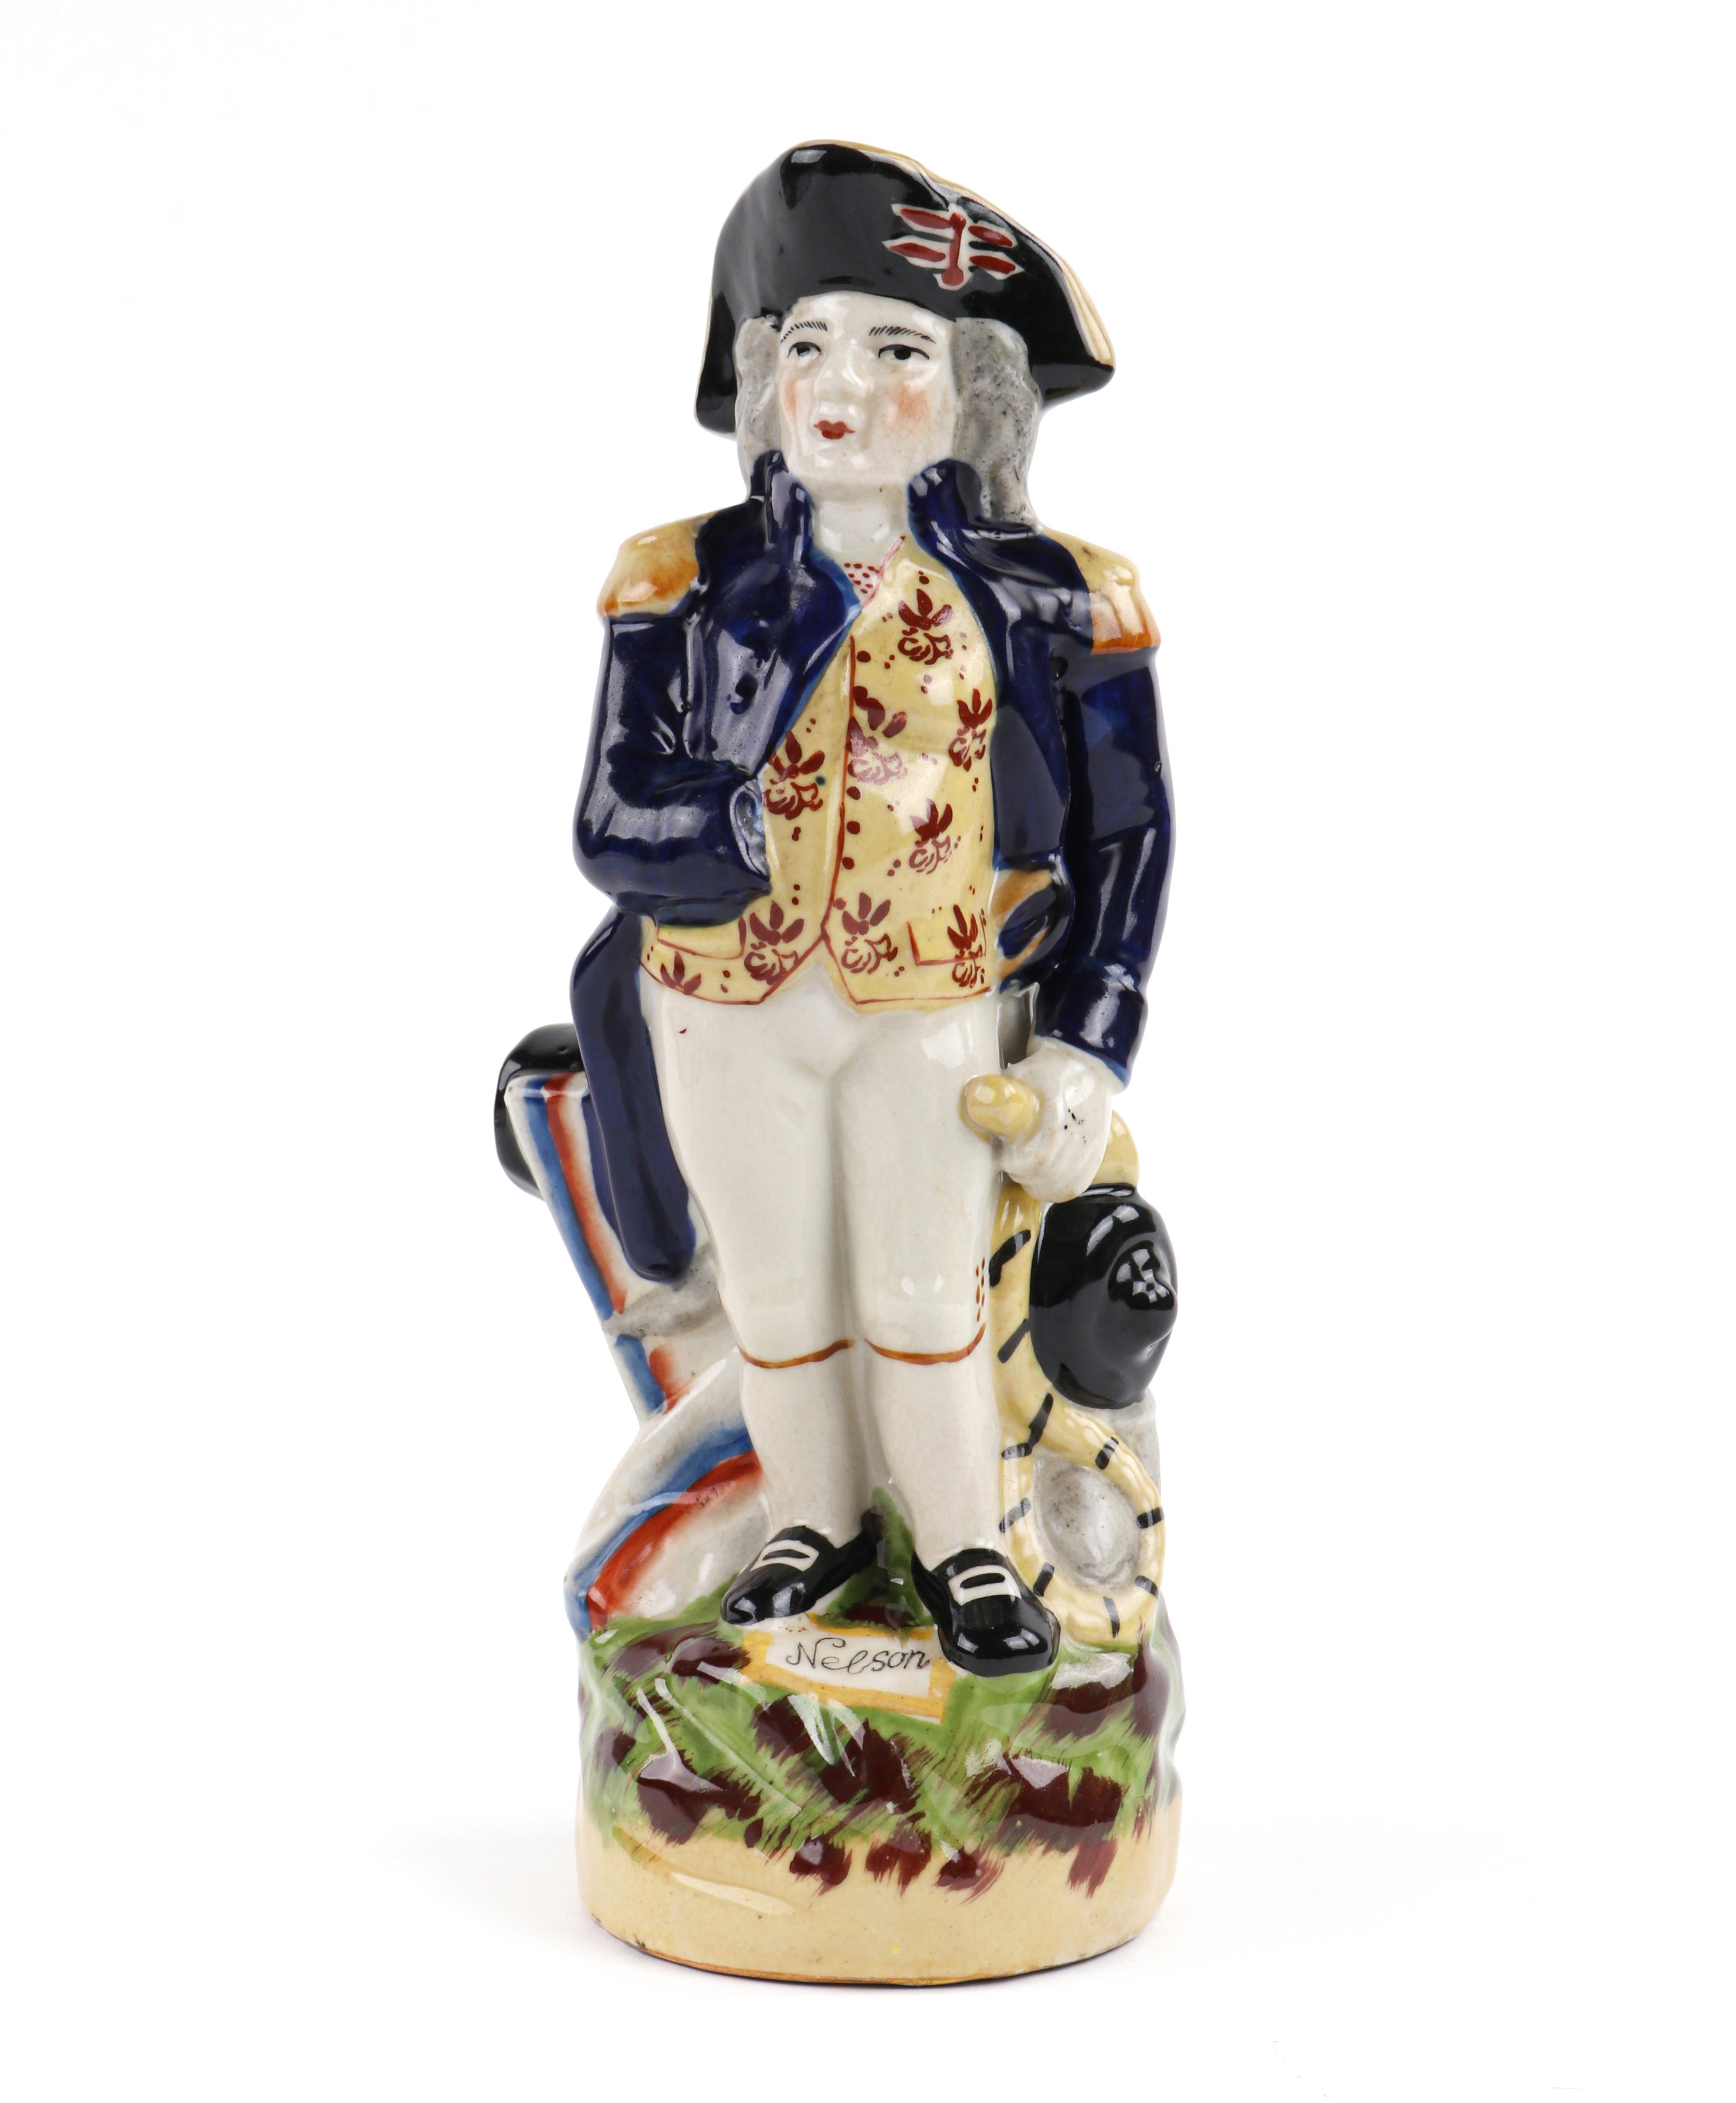 Antique Staffordshire Lord Horatio Nelson Hand Painted Toby Jug Pitcher Figure

This antique sculpted figural toby jug is modelled as Vice Admiral Horatio Nelson (British, 1758-1805). He stands in front of a cannon, with his right hand tucked in